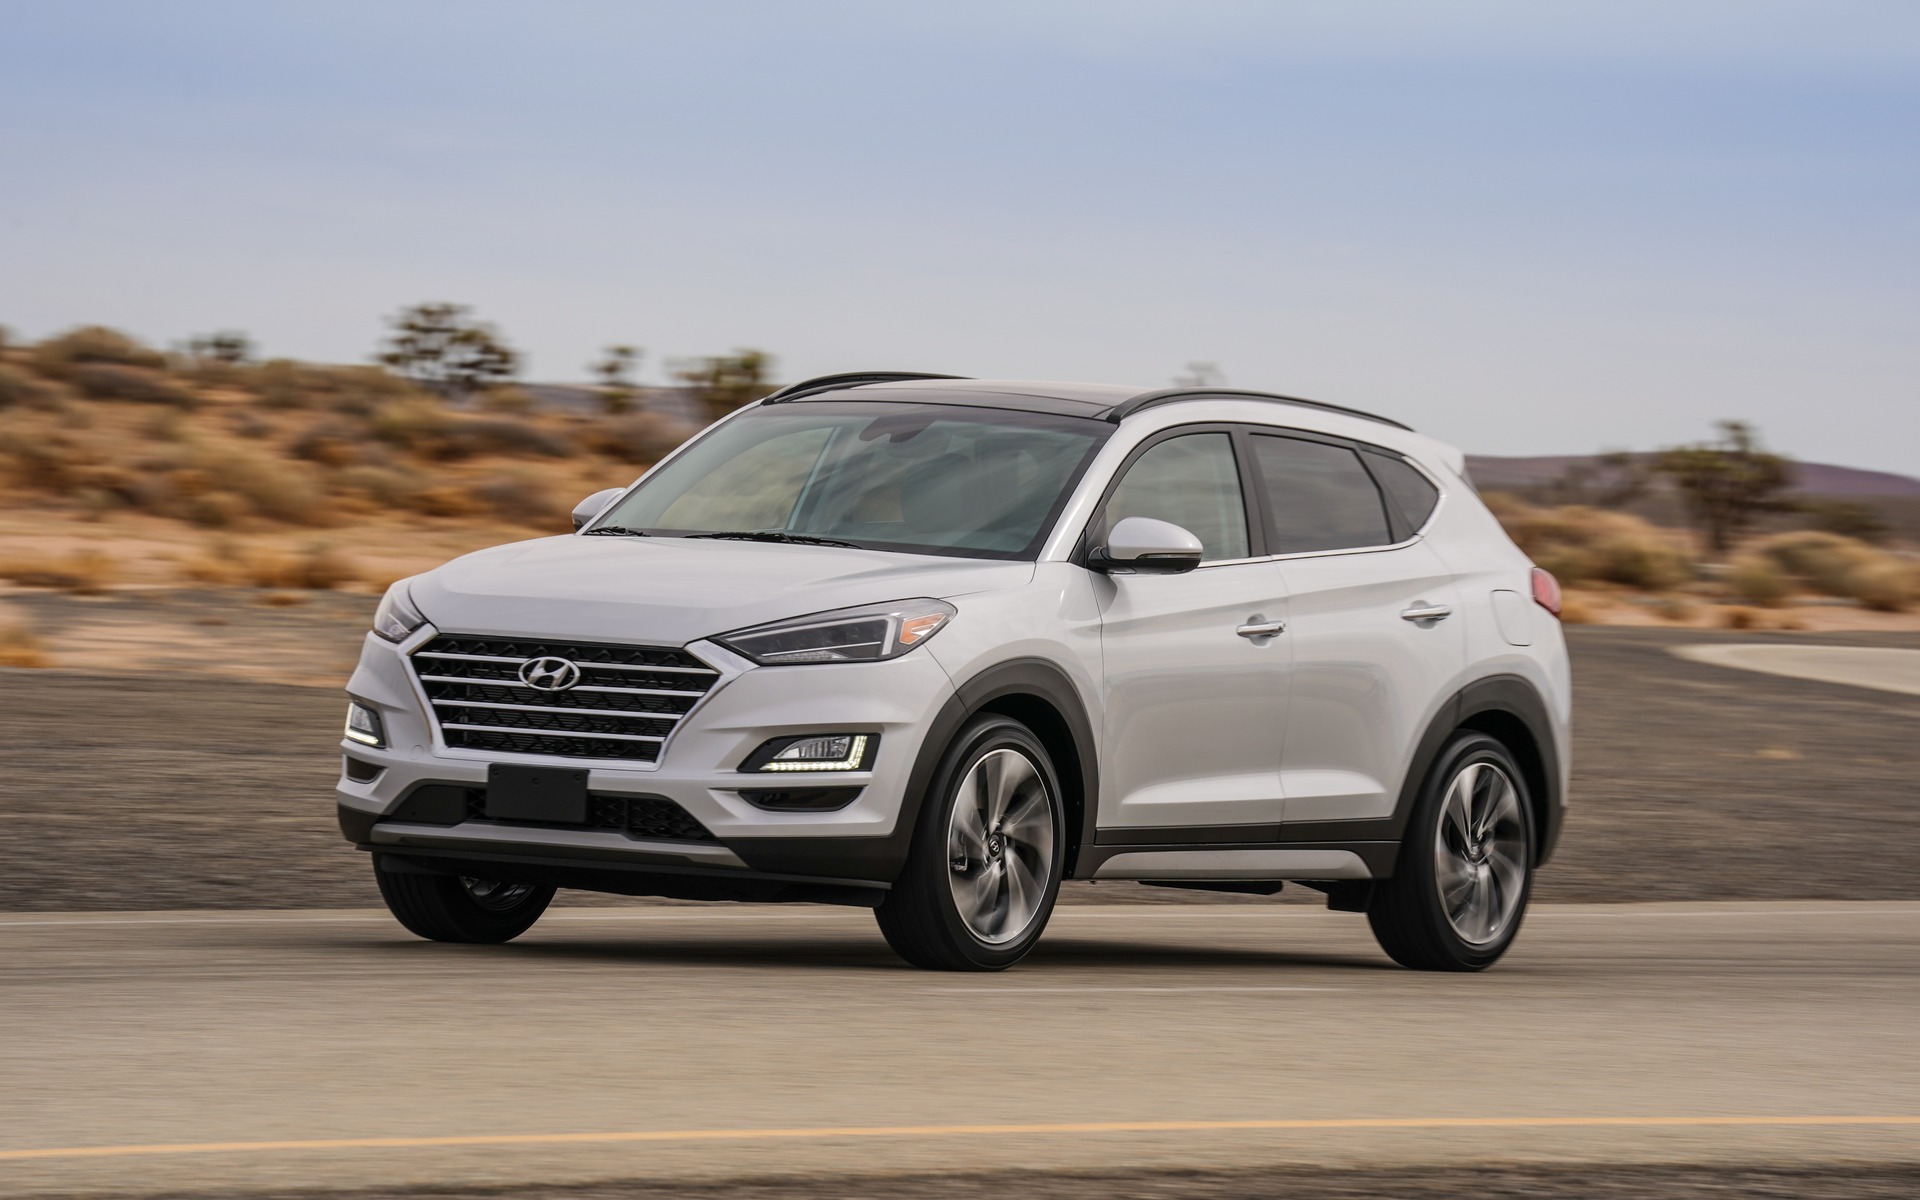 2019 Hyundai Tucson - News, reviews, picture galleries and videos